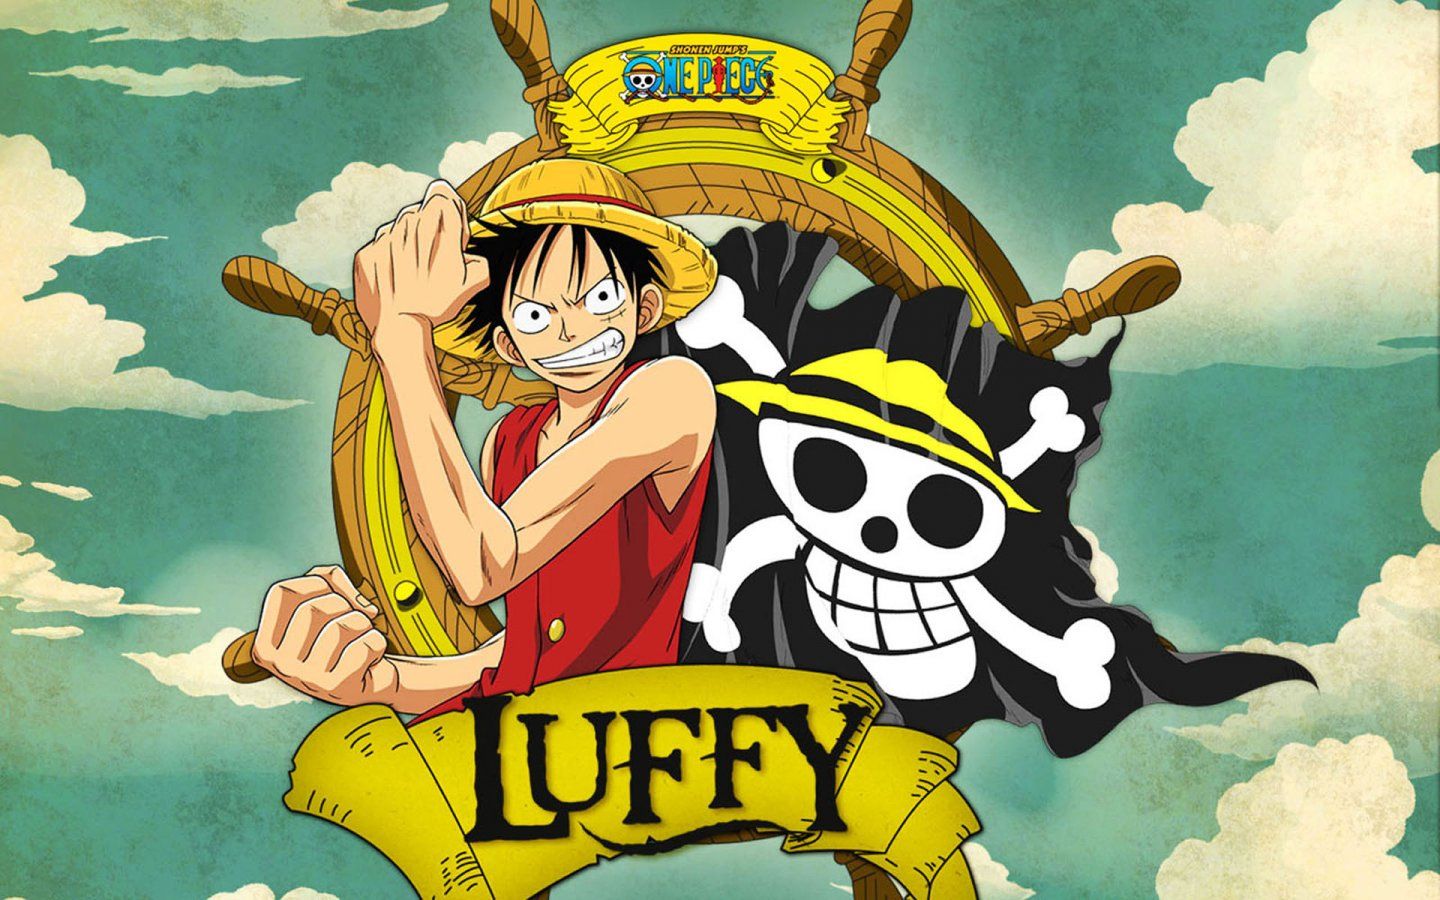 Luffy Wallpaper 1440x900 Wallpapers, 1440x900 Wallpapers